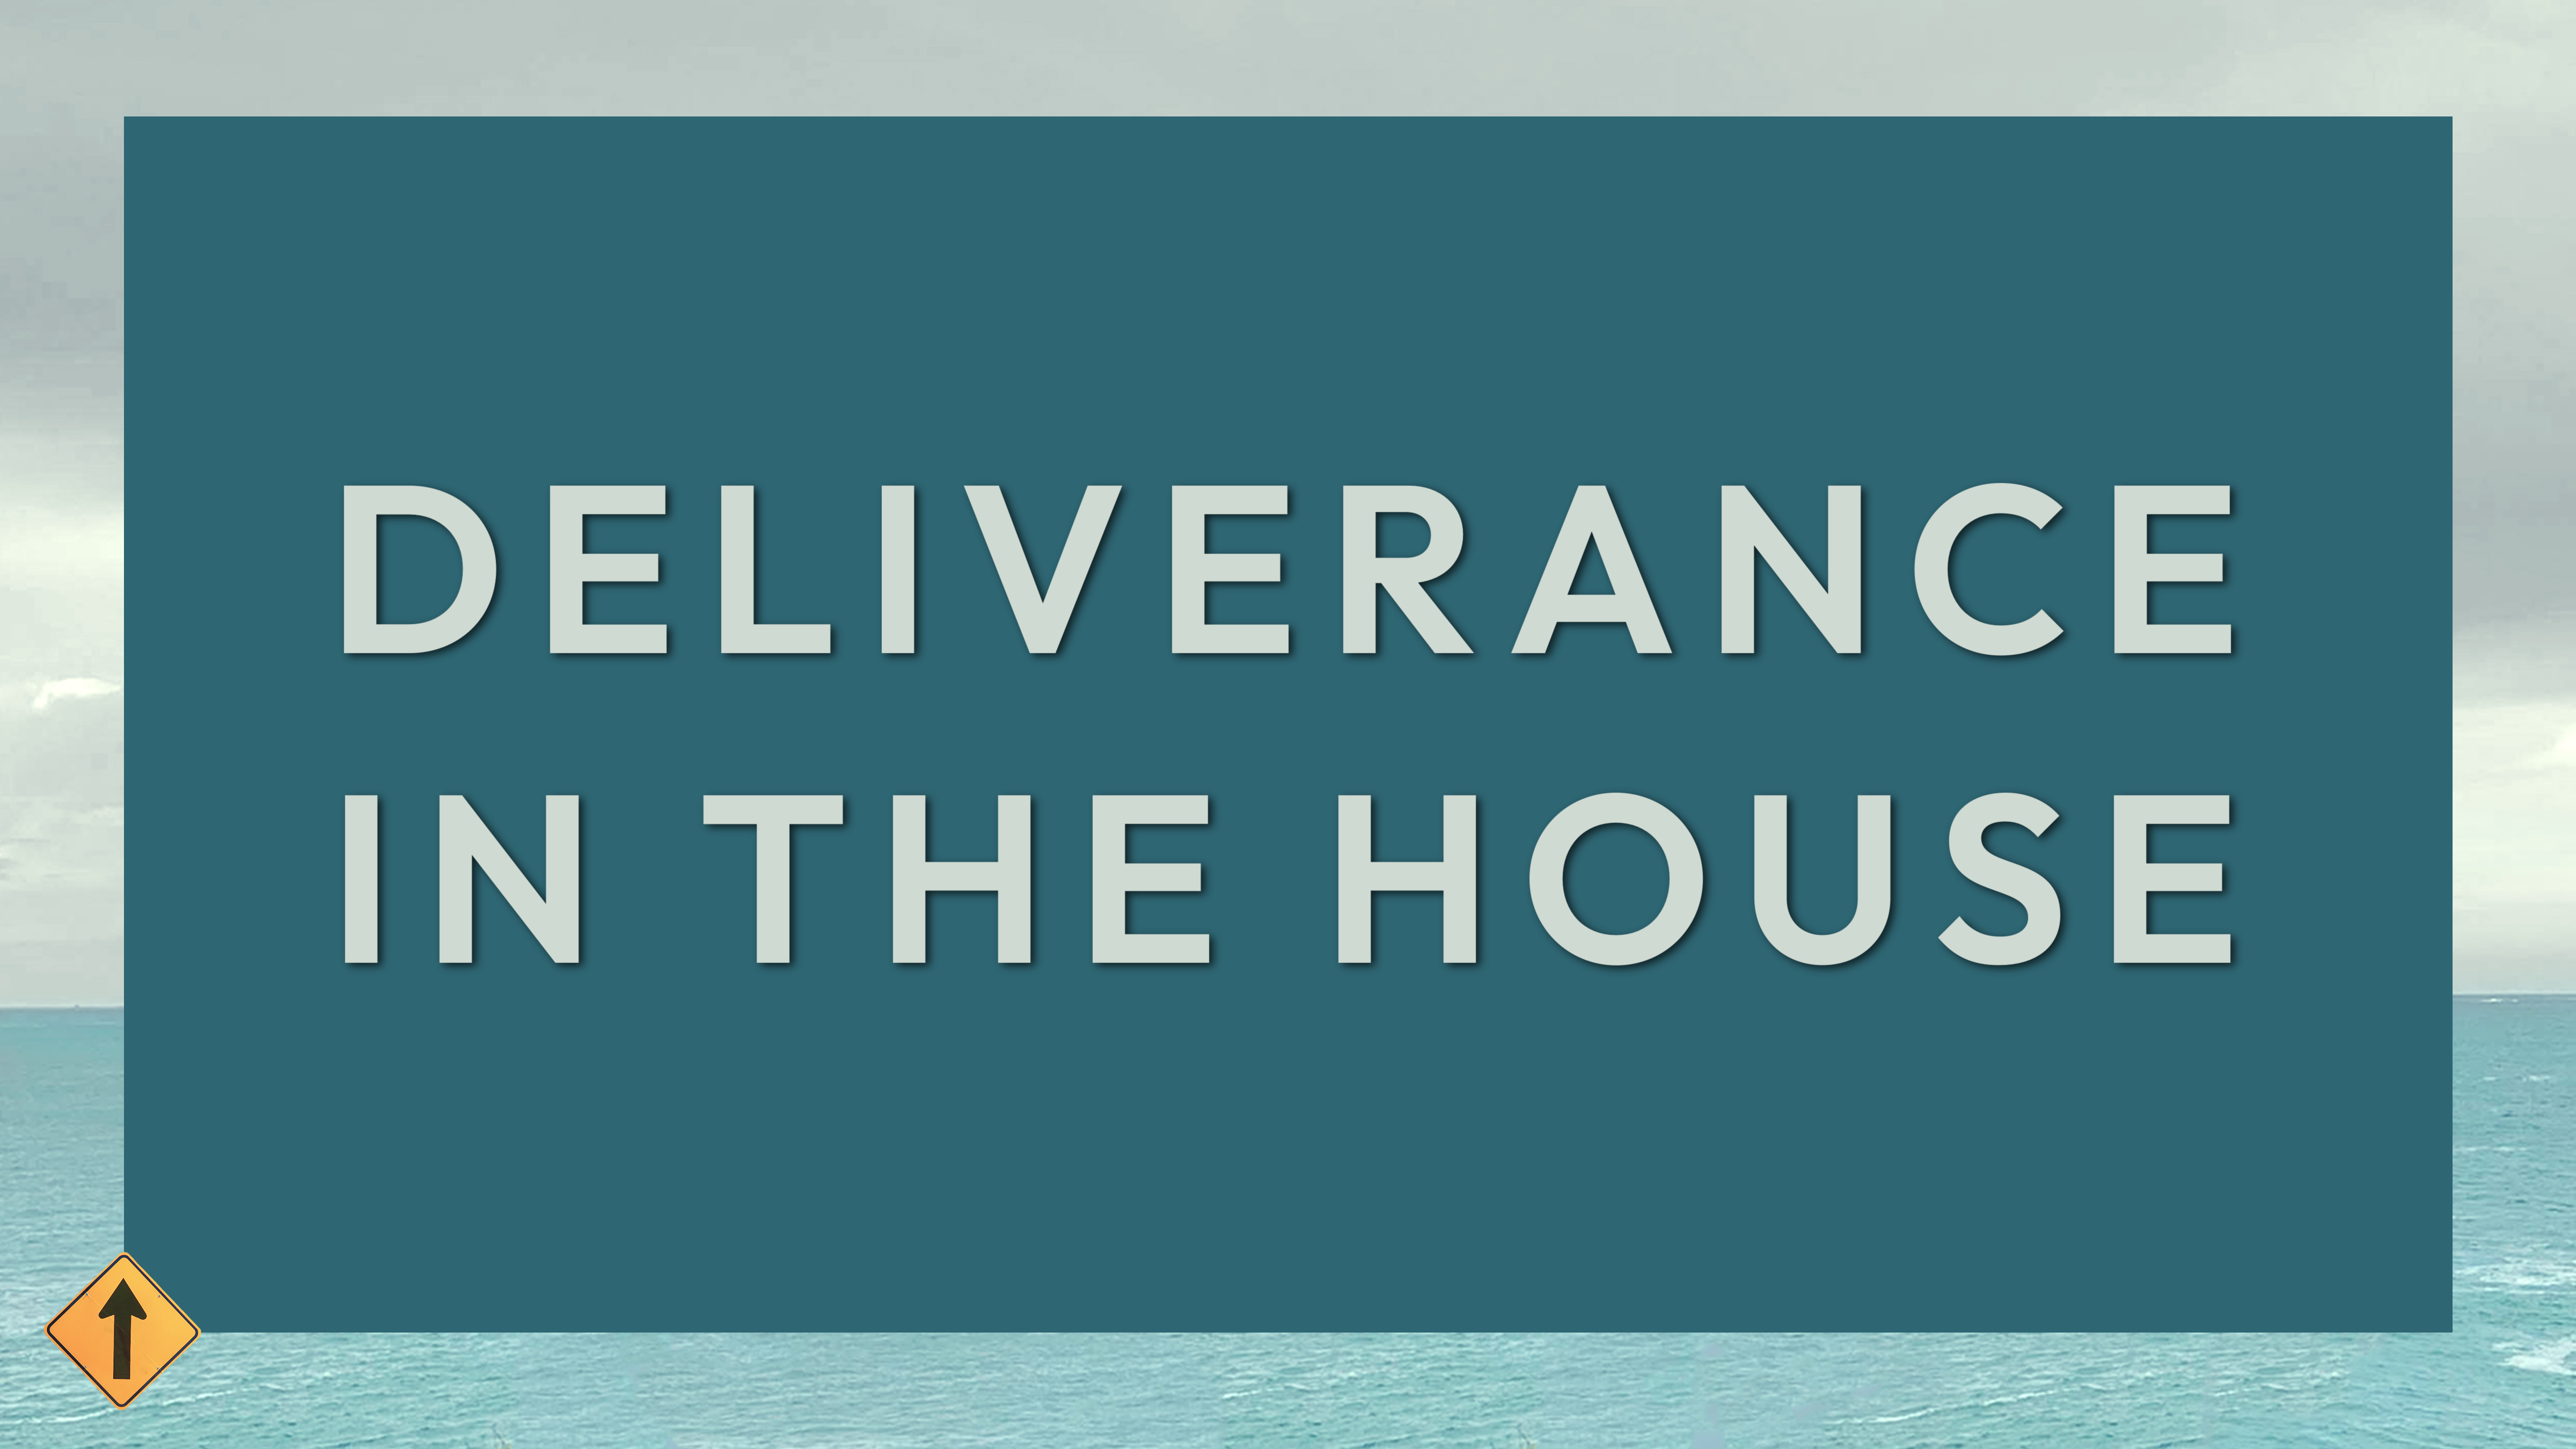 Deliverance in the House